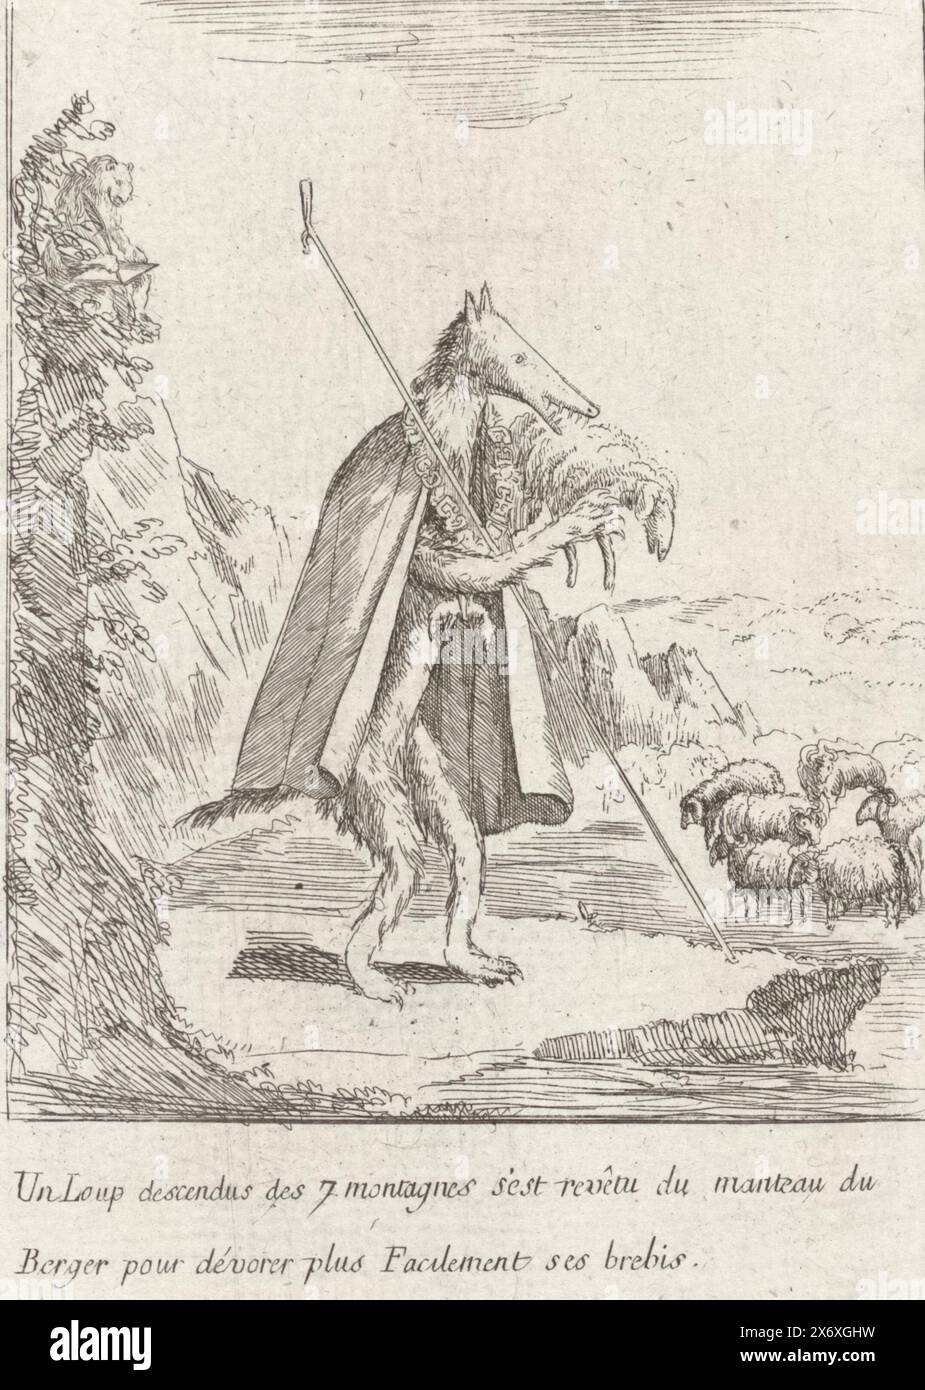 Joseph II as a wolf devouring a sheep, Brabant Revolution, 1787-1790 (series title), Cartoon of the Austrian Emperor Joseph II, here in the guise of a wolf with the insignia of the Golden Fleece disguised as a shepherd on the about to devour a sheep. Related to August 12, 1789. With 2-line caption in French. Part of a large group of prints relating to the events of the Brabant Revolution and the period 1787-1790., print, print maker: anonymous, Southern Netherlands, 1787 - 1790, paper, etching, height, 174 mm × width, 108 mm Stock Photo